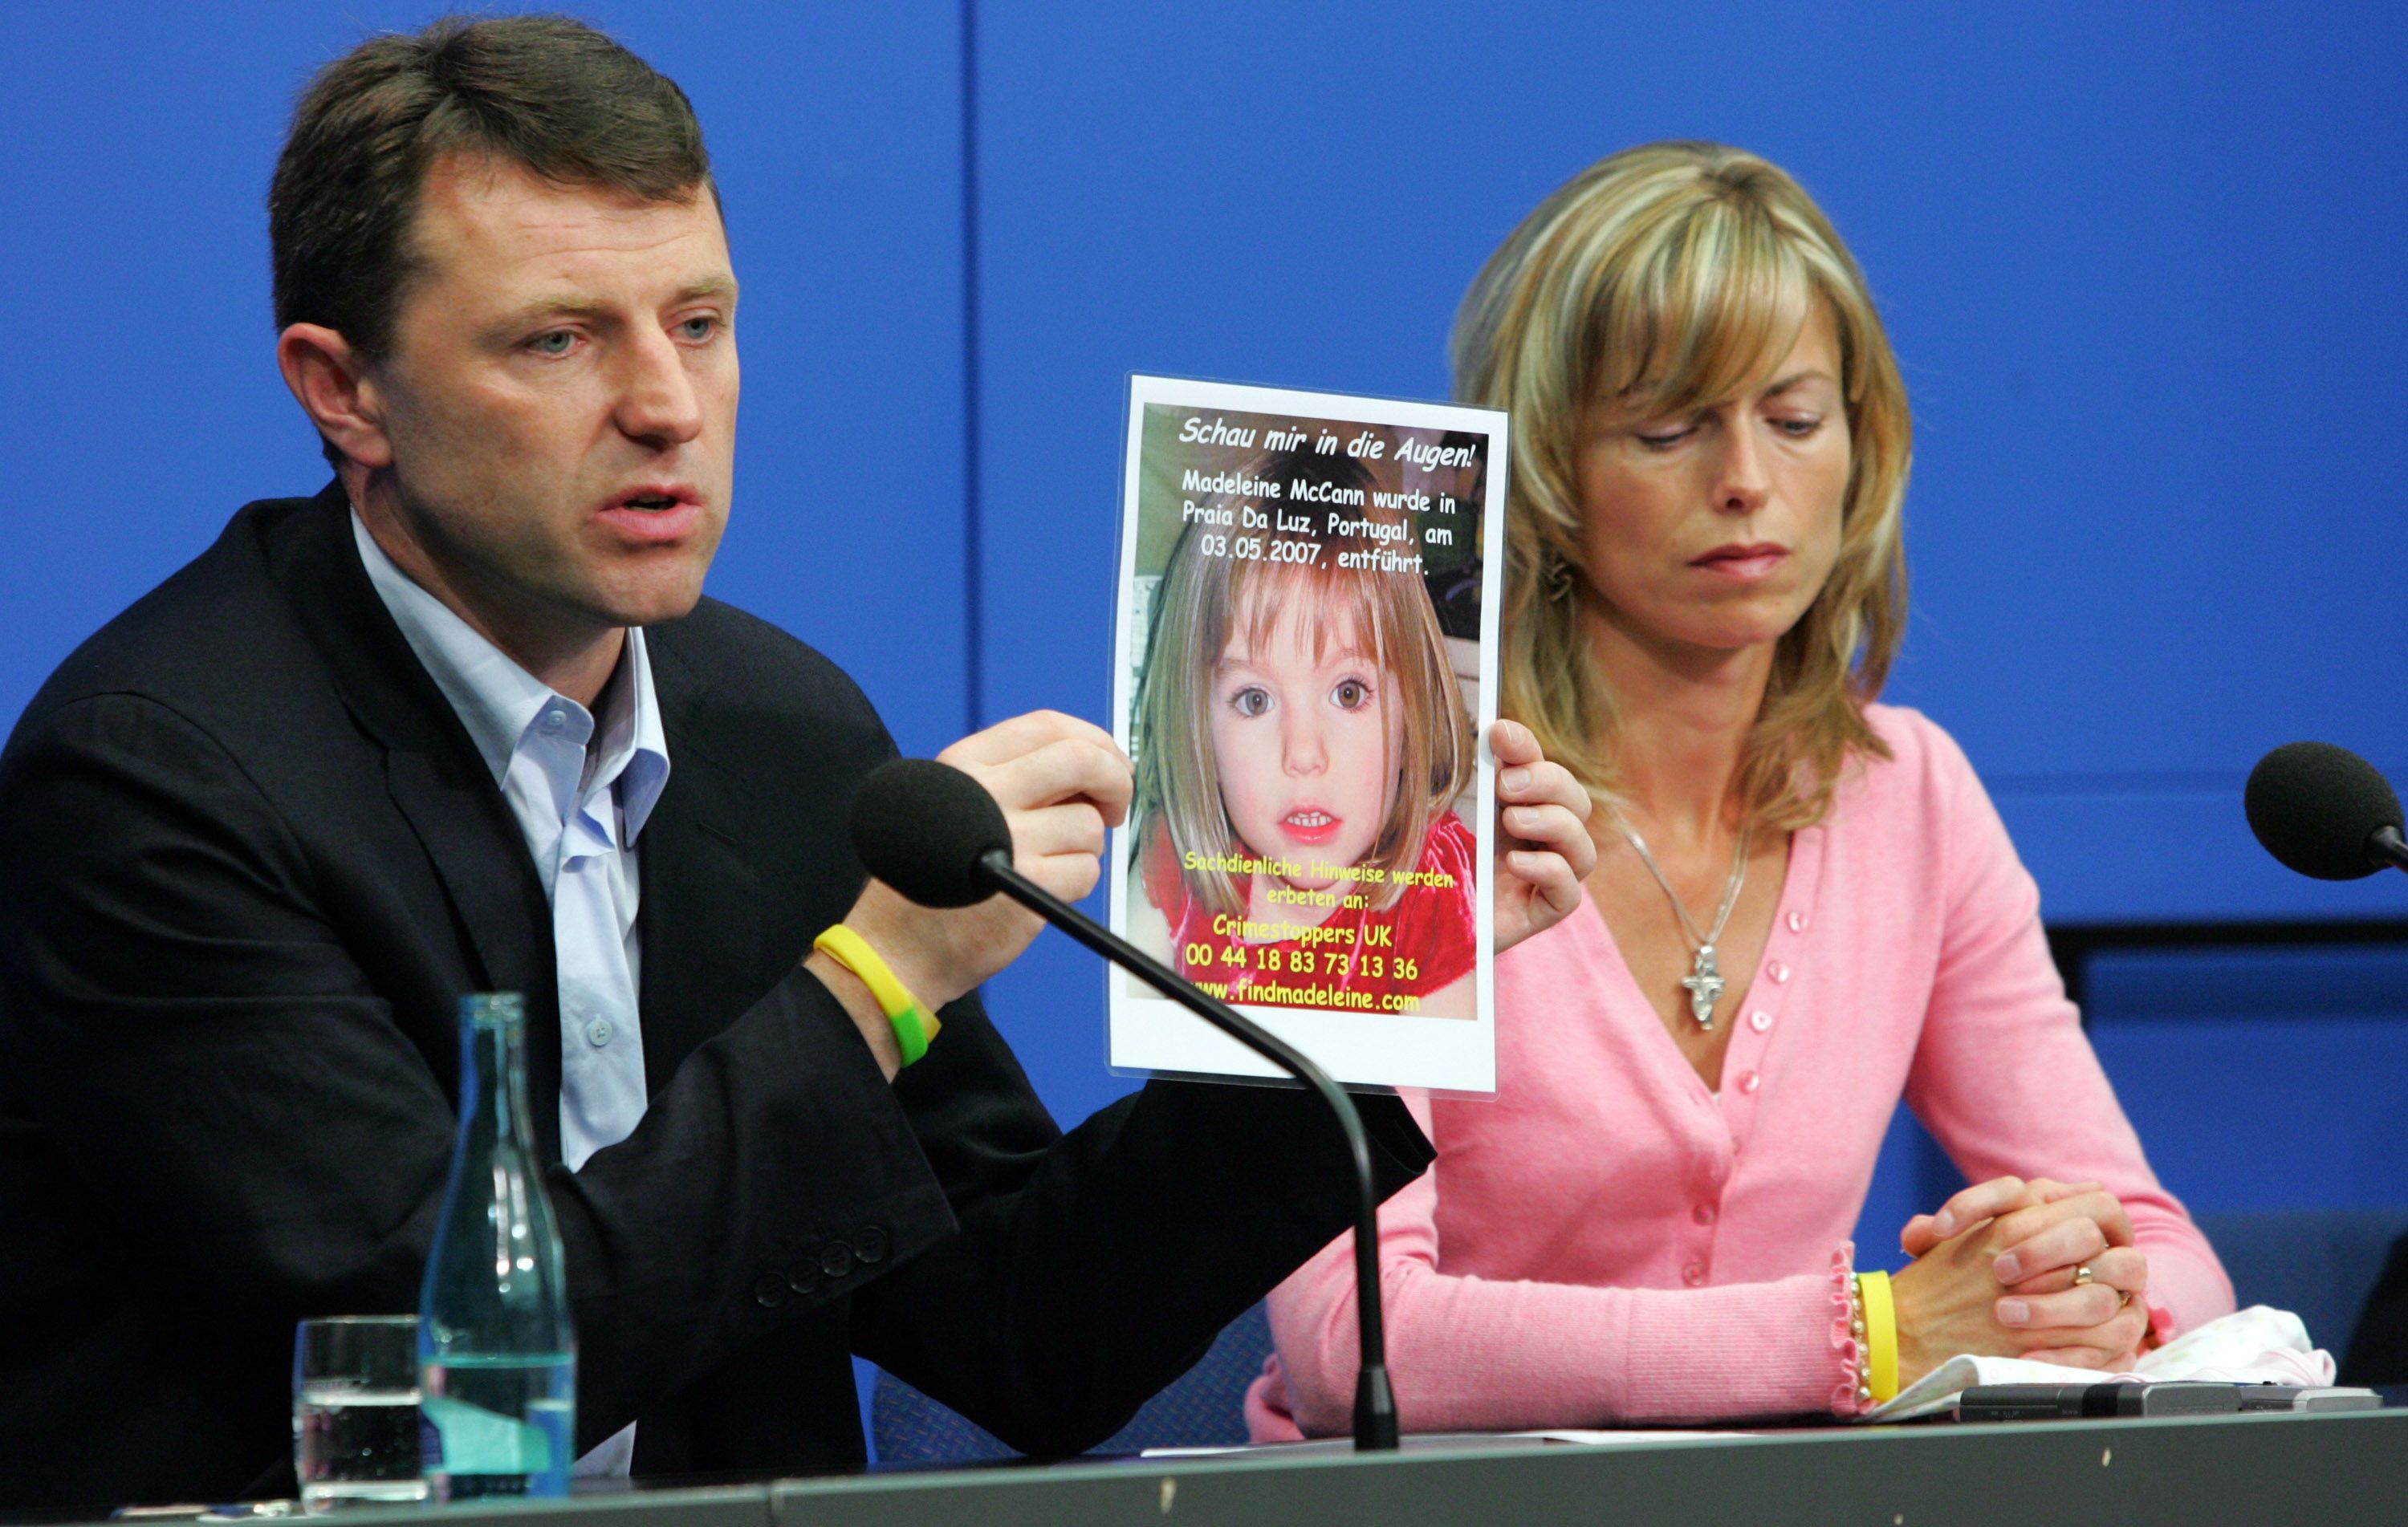 Madeleine McCann's Parent, Kate and Gerry McCann at Berlin holding a picture of Madeleine during a press conference on June 6, 2007 | Photo: Getty Images